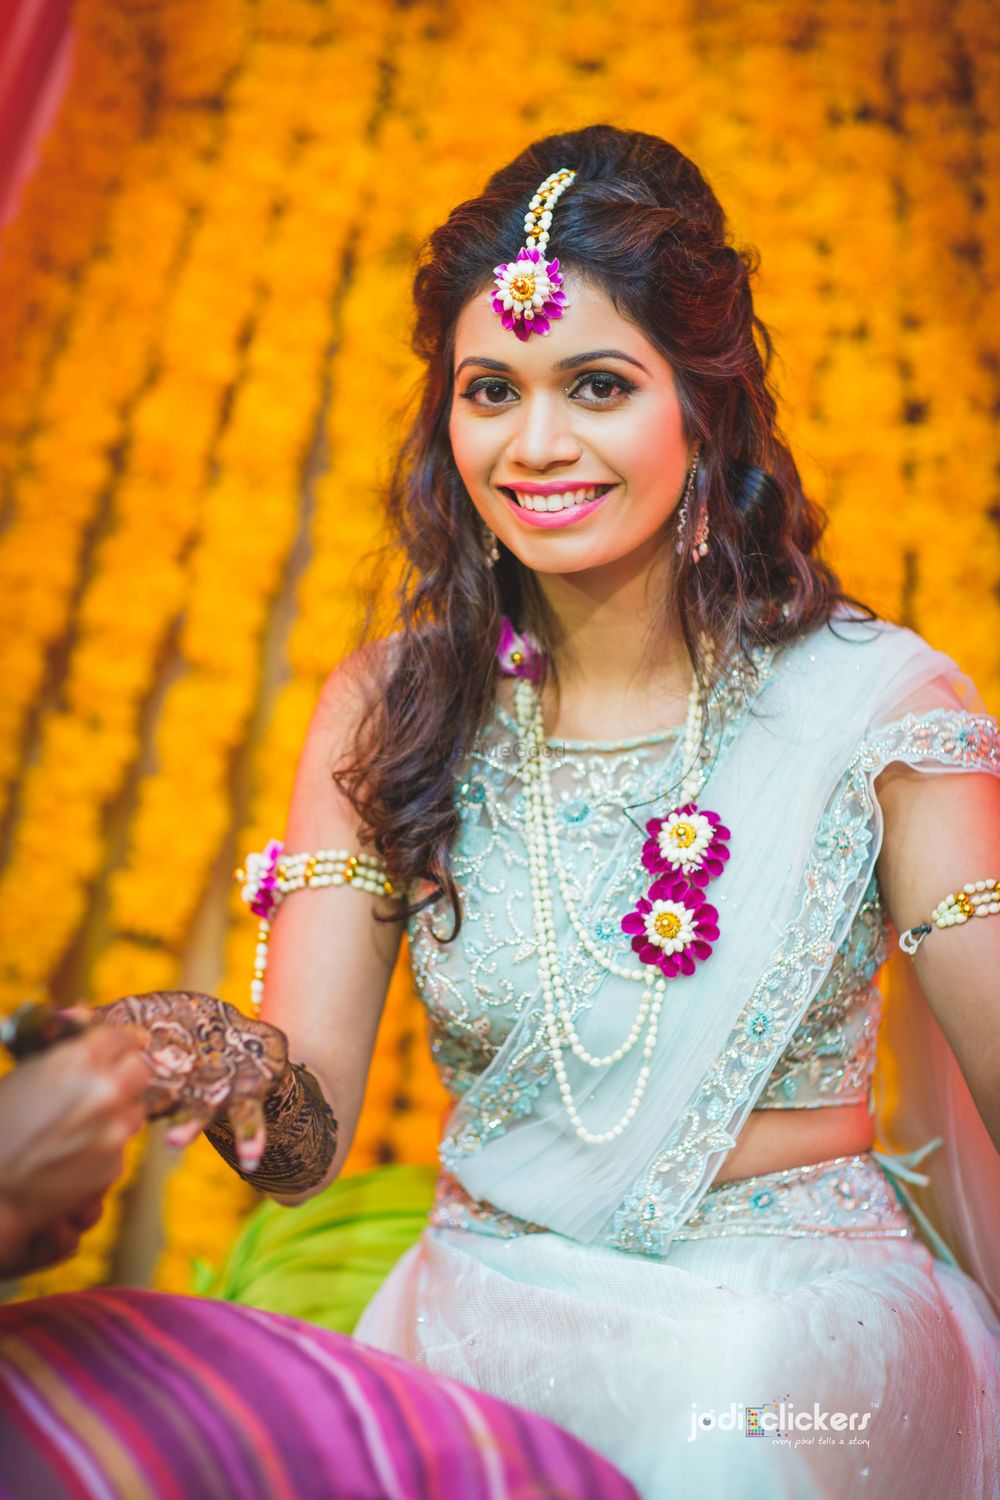 Photo of Bride wearing light blue mehendi and floral jewellery